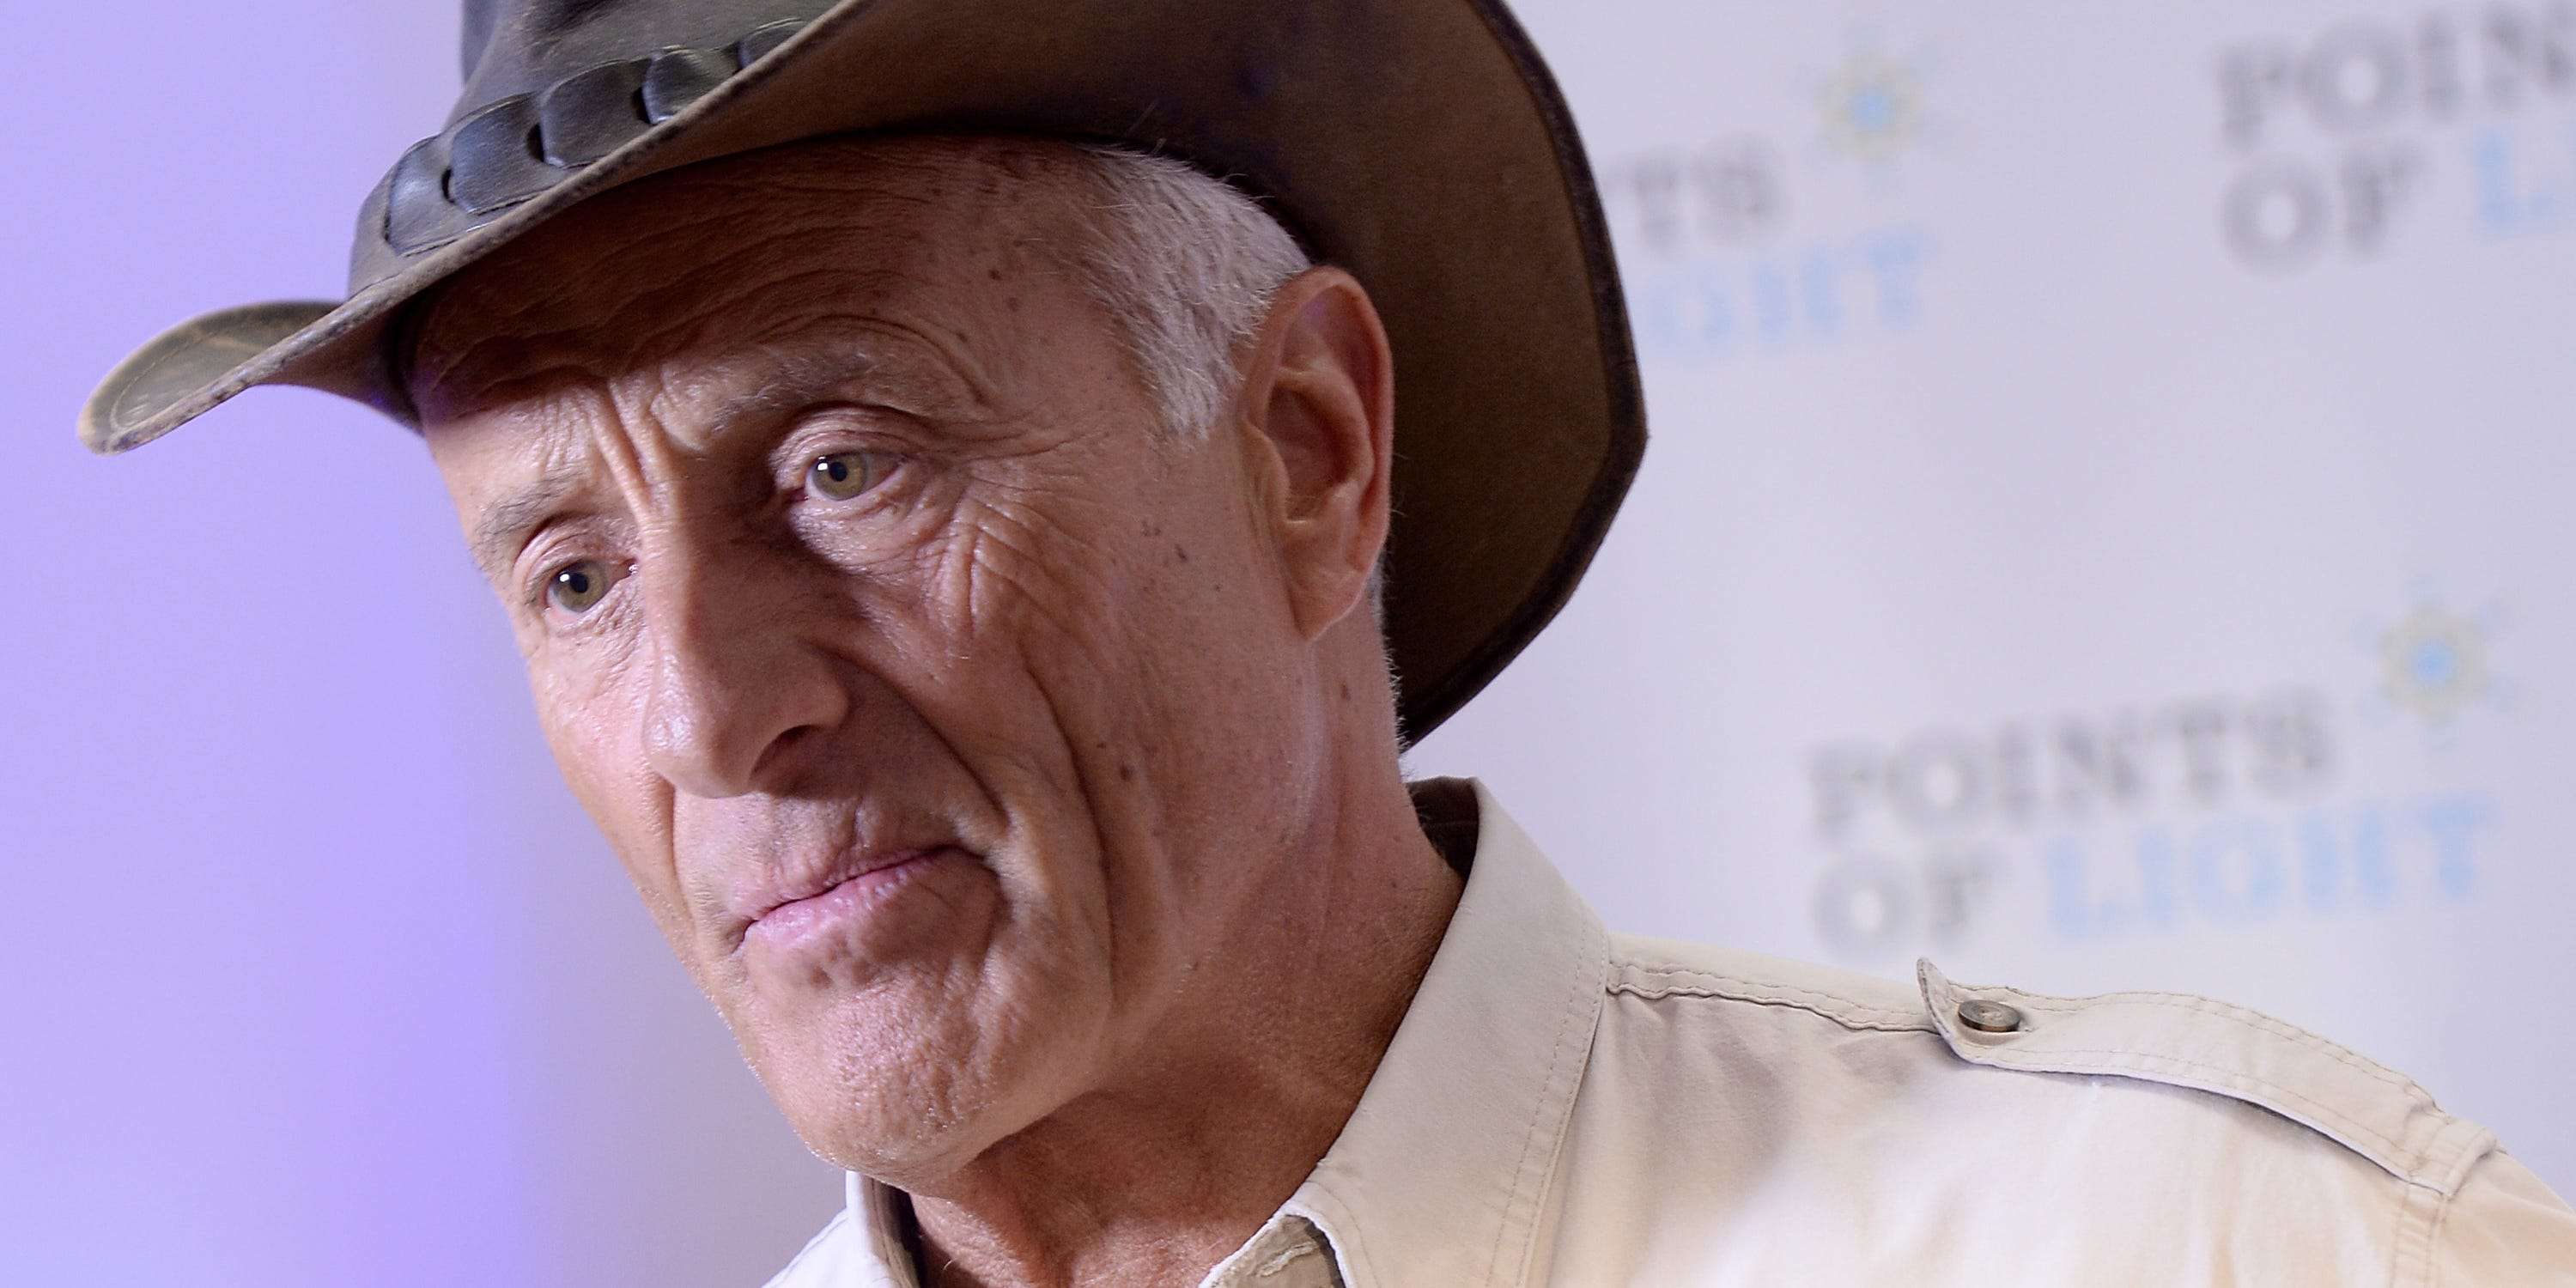 Jack Hanna has been diagnosed with dementia and will retire from public